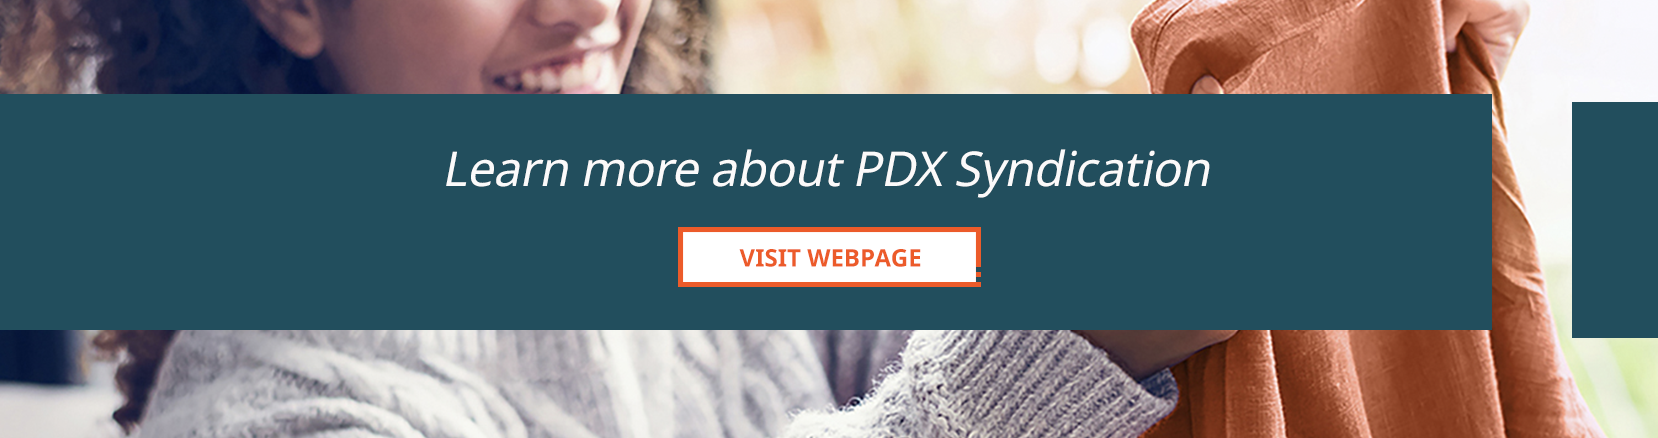 learn more about pdx syndication